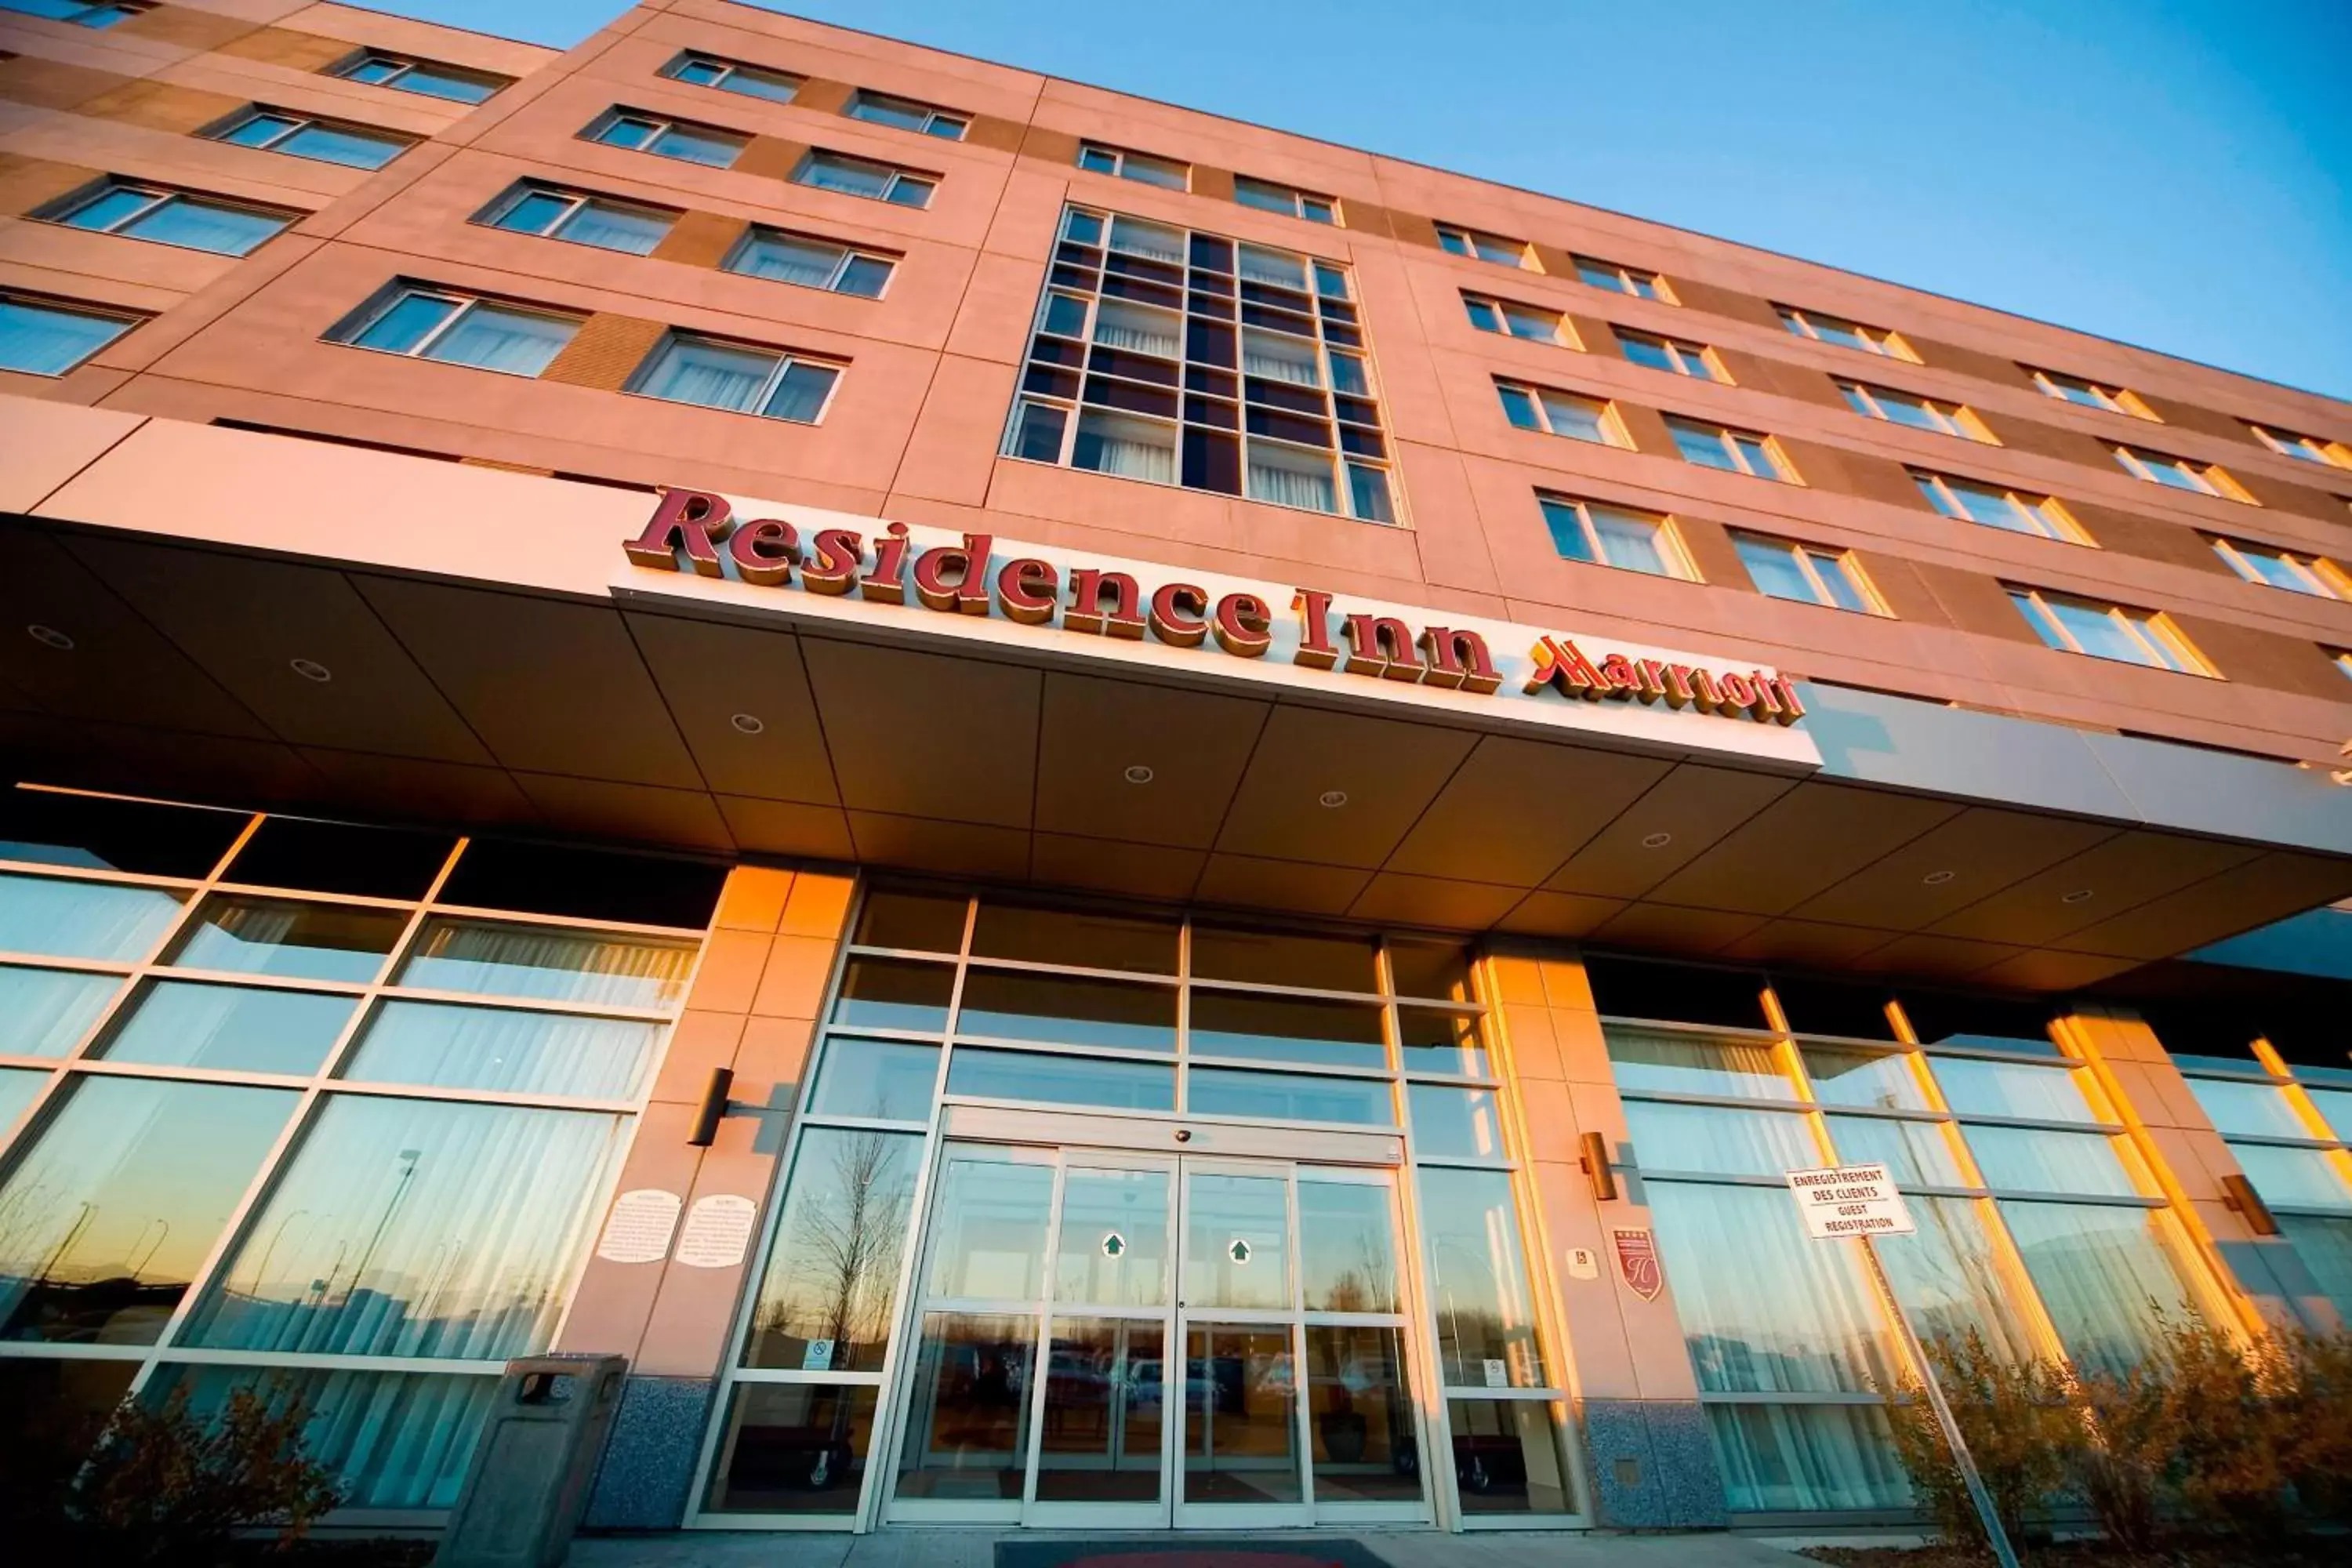 Property Building in Residence Inn by Marriott Montreal Airport